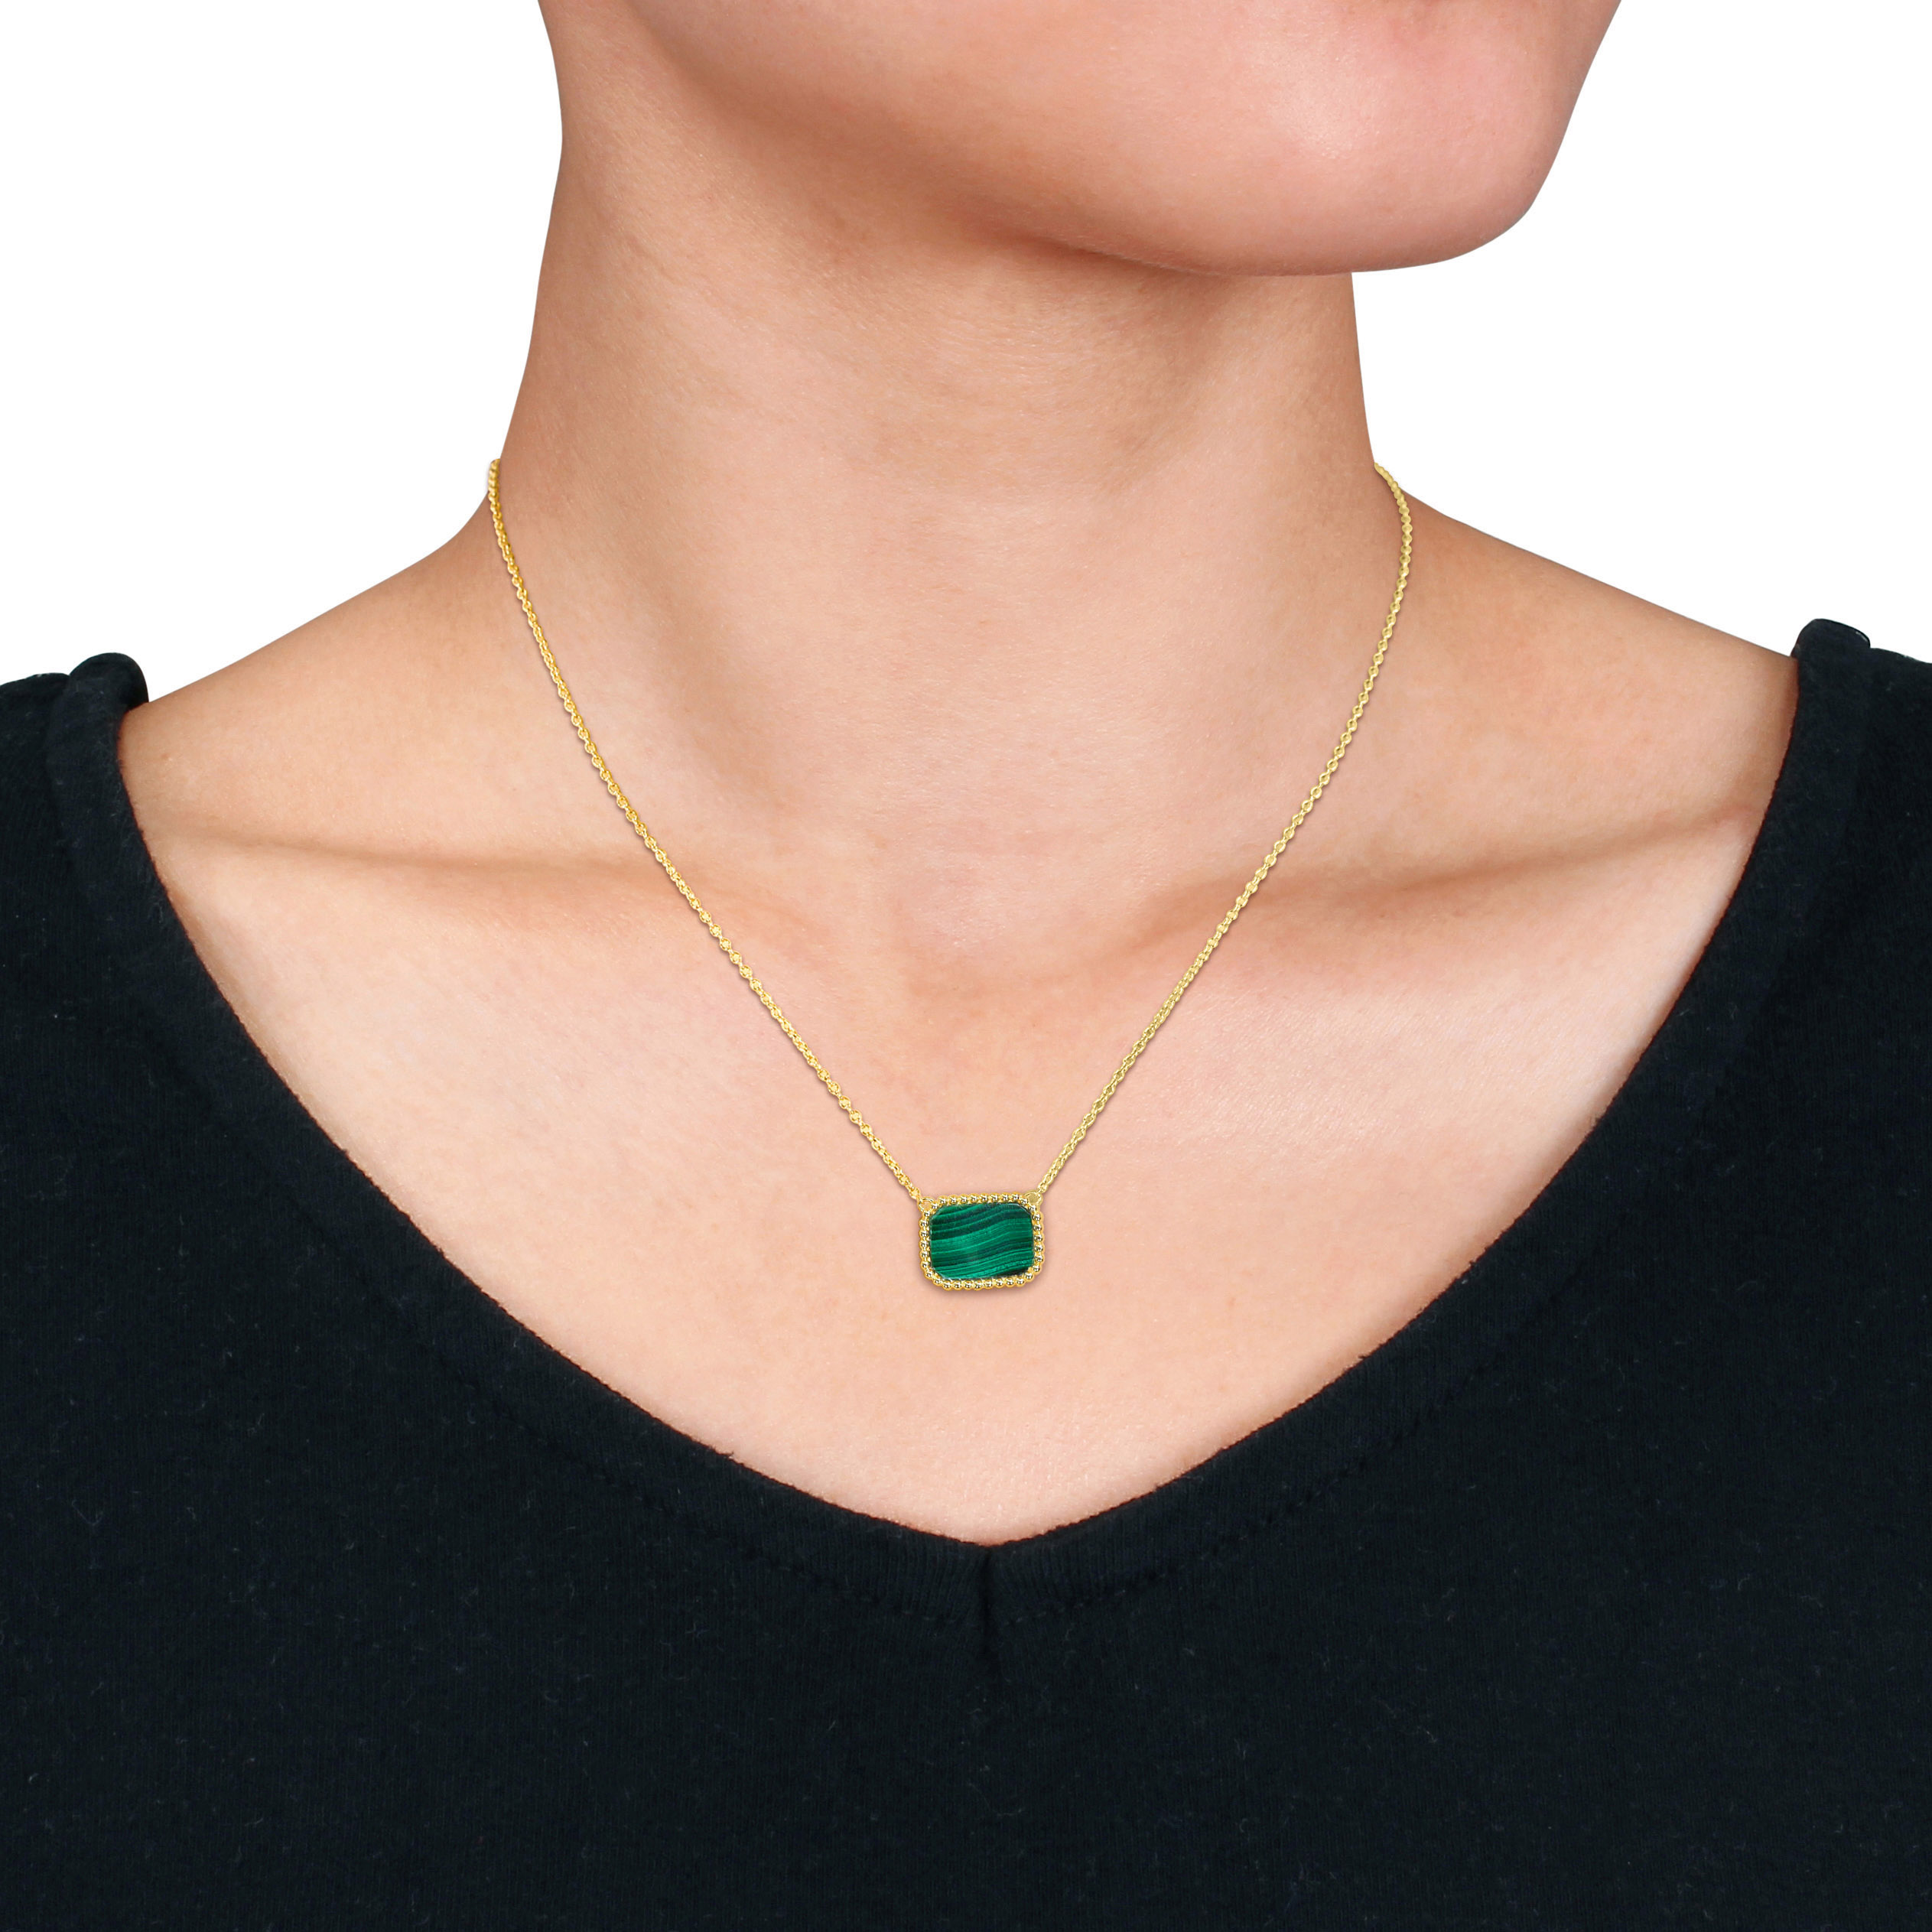 5 CT TGW Octagon Shape Malachite Necklace With Beaded Halo in Yellow Plated Sterling Silver - 17 in.